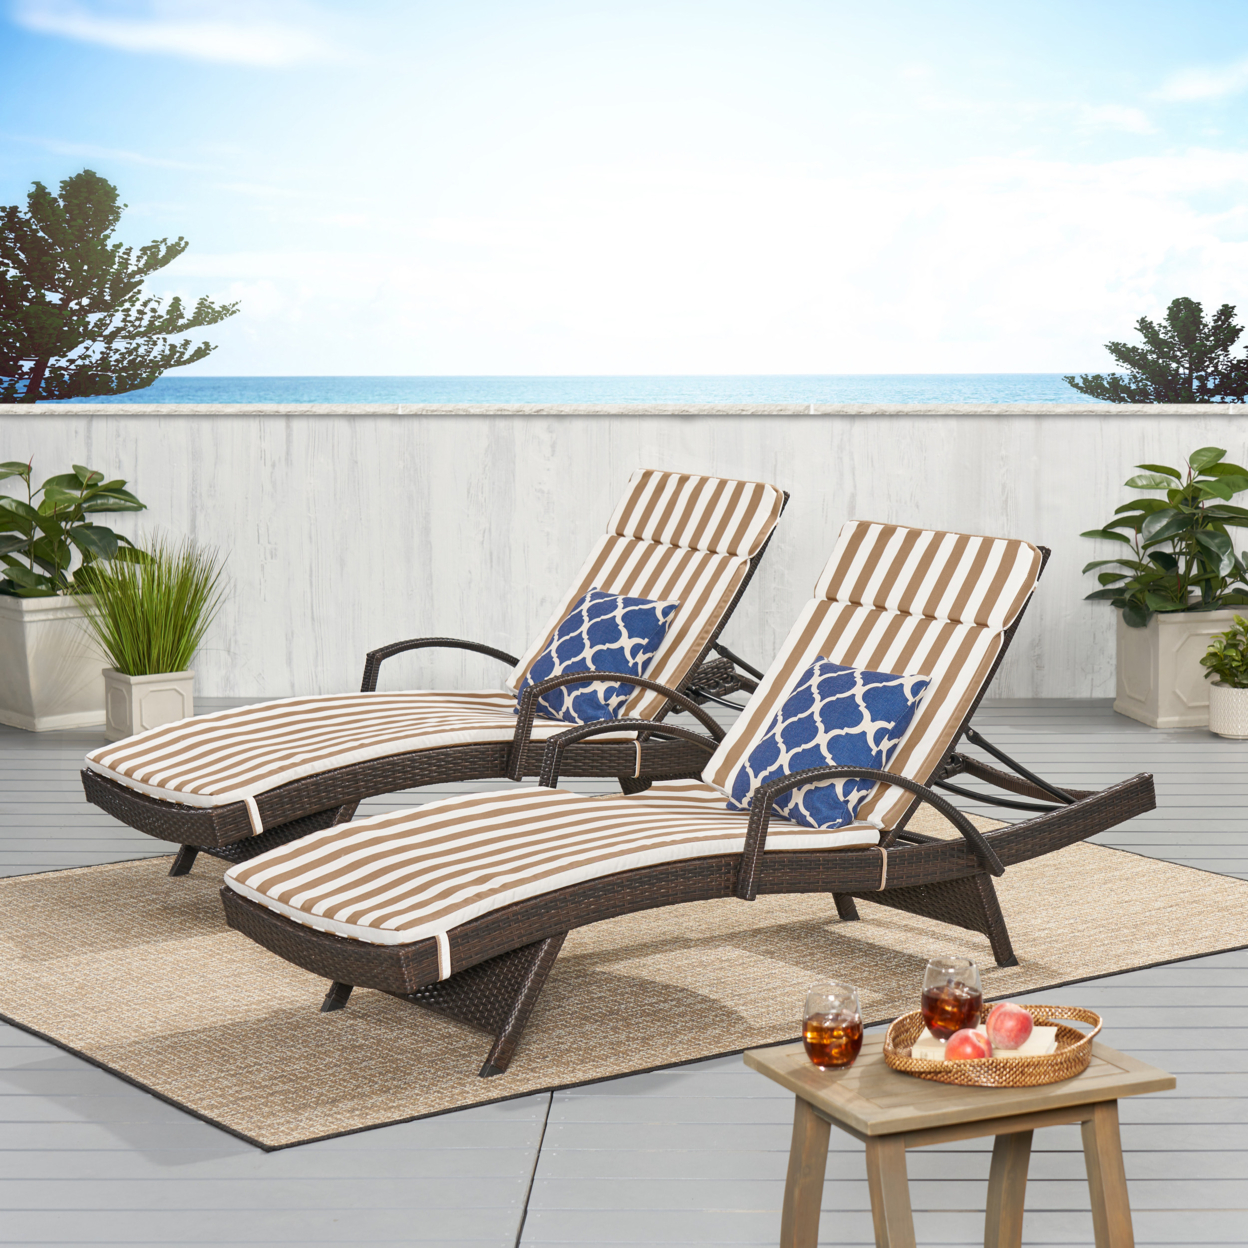 Lakeport Outdoor Wicker Lounge With Water Resistant Cushion (Set Of 2) - Brown/White Cushion